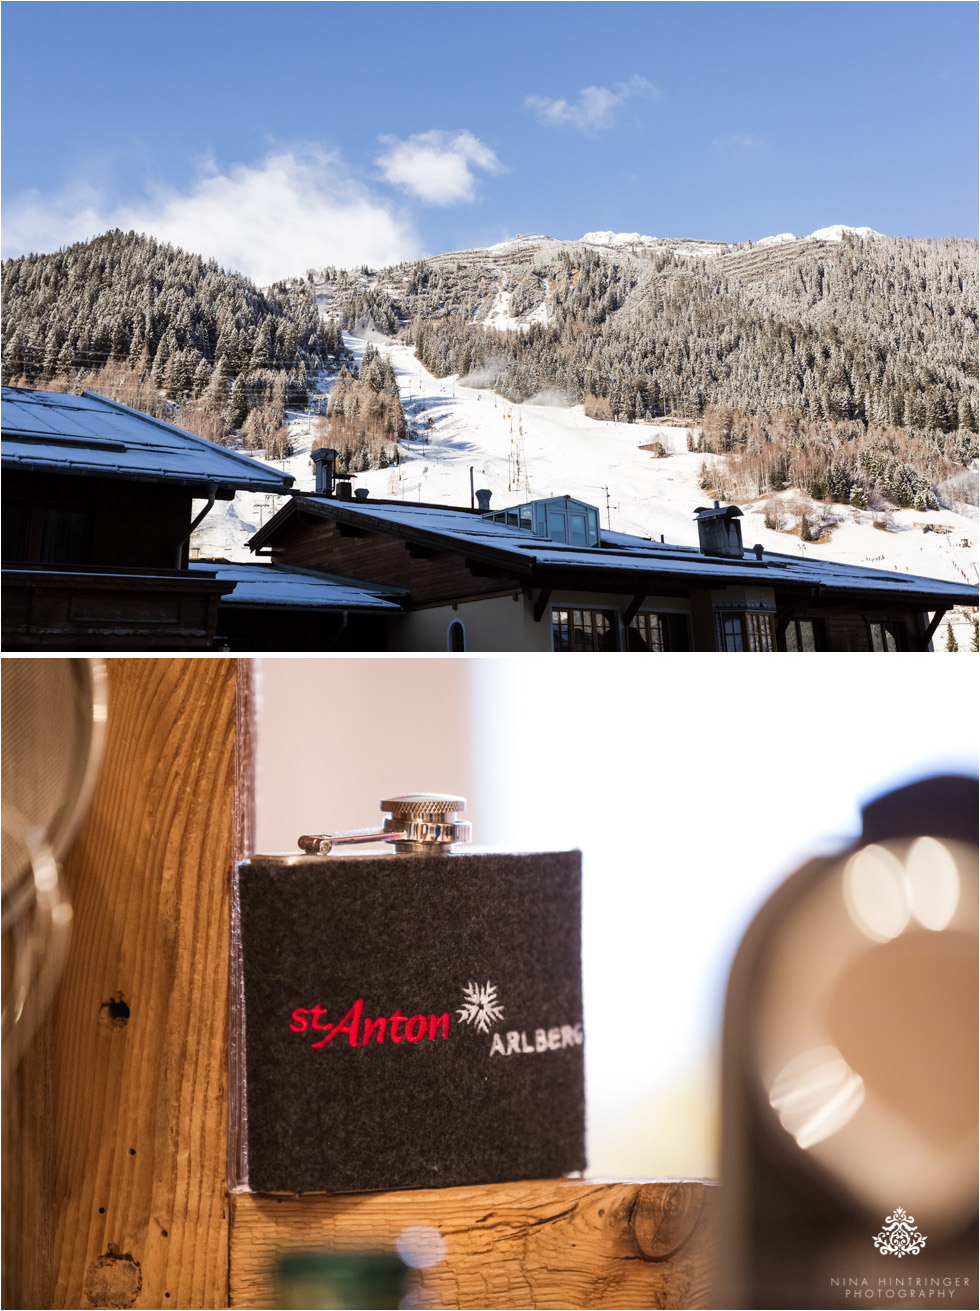  From Texas to Austria to celebrate Love | Tracey & Kelly winter wedding | St. Anton & St. Christoph, Arlberg - Blog of Nina Hintringer Photography - Wedding Photography, Wedding Reportage and Destination Weddings